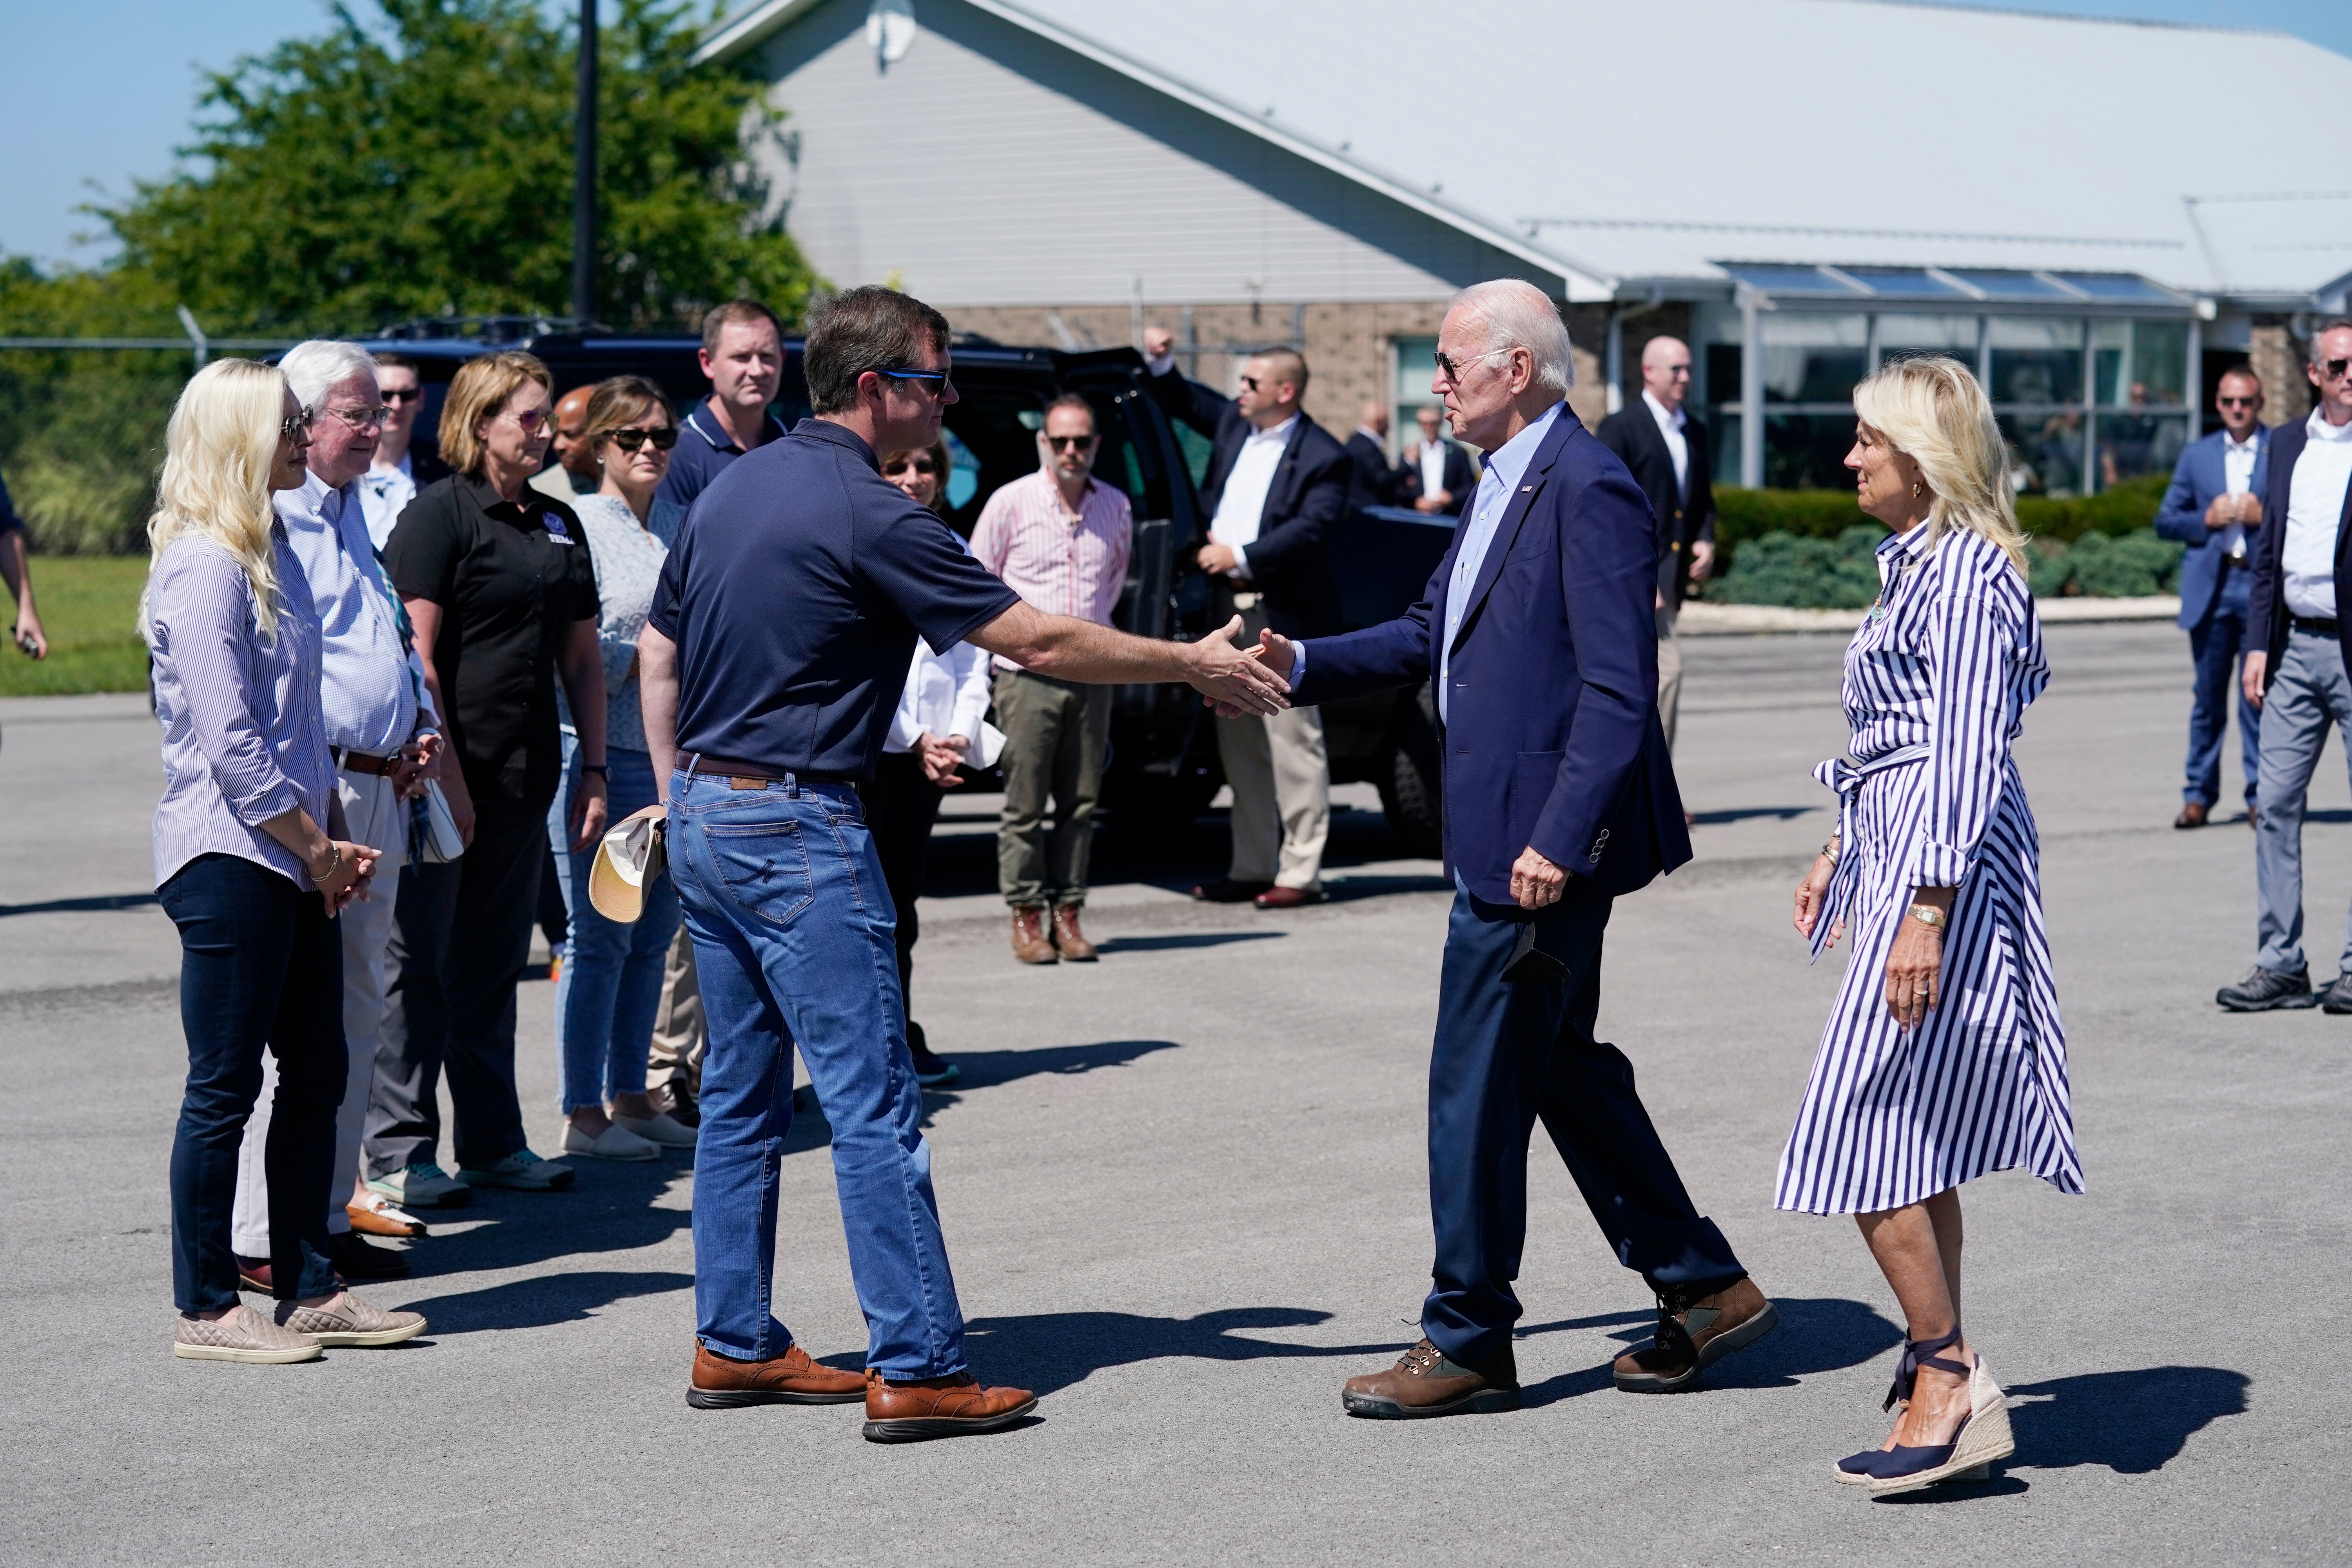 President Joe Biden and first lady Jill Biden are greeted by Kentucky Gov Andy Beshear